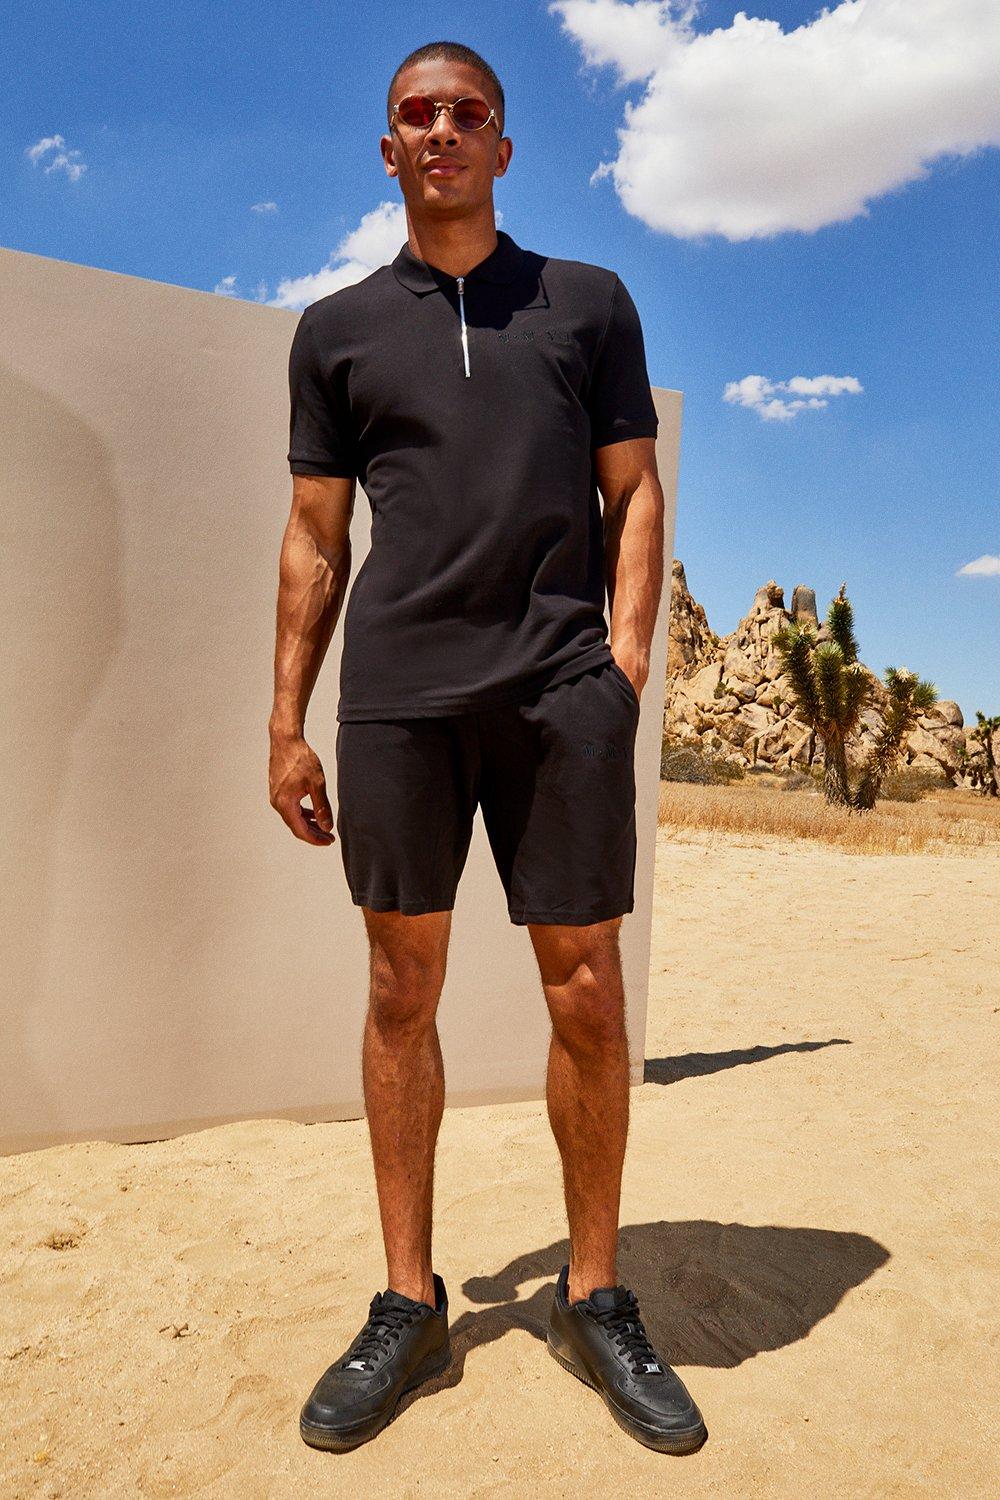 black polo and shorts